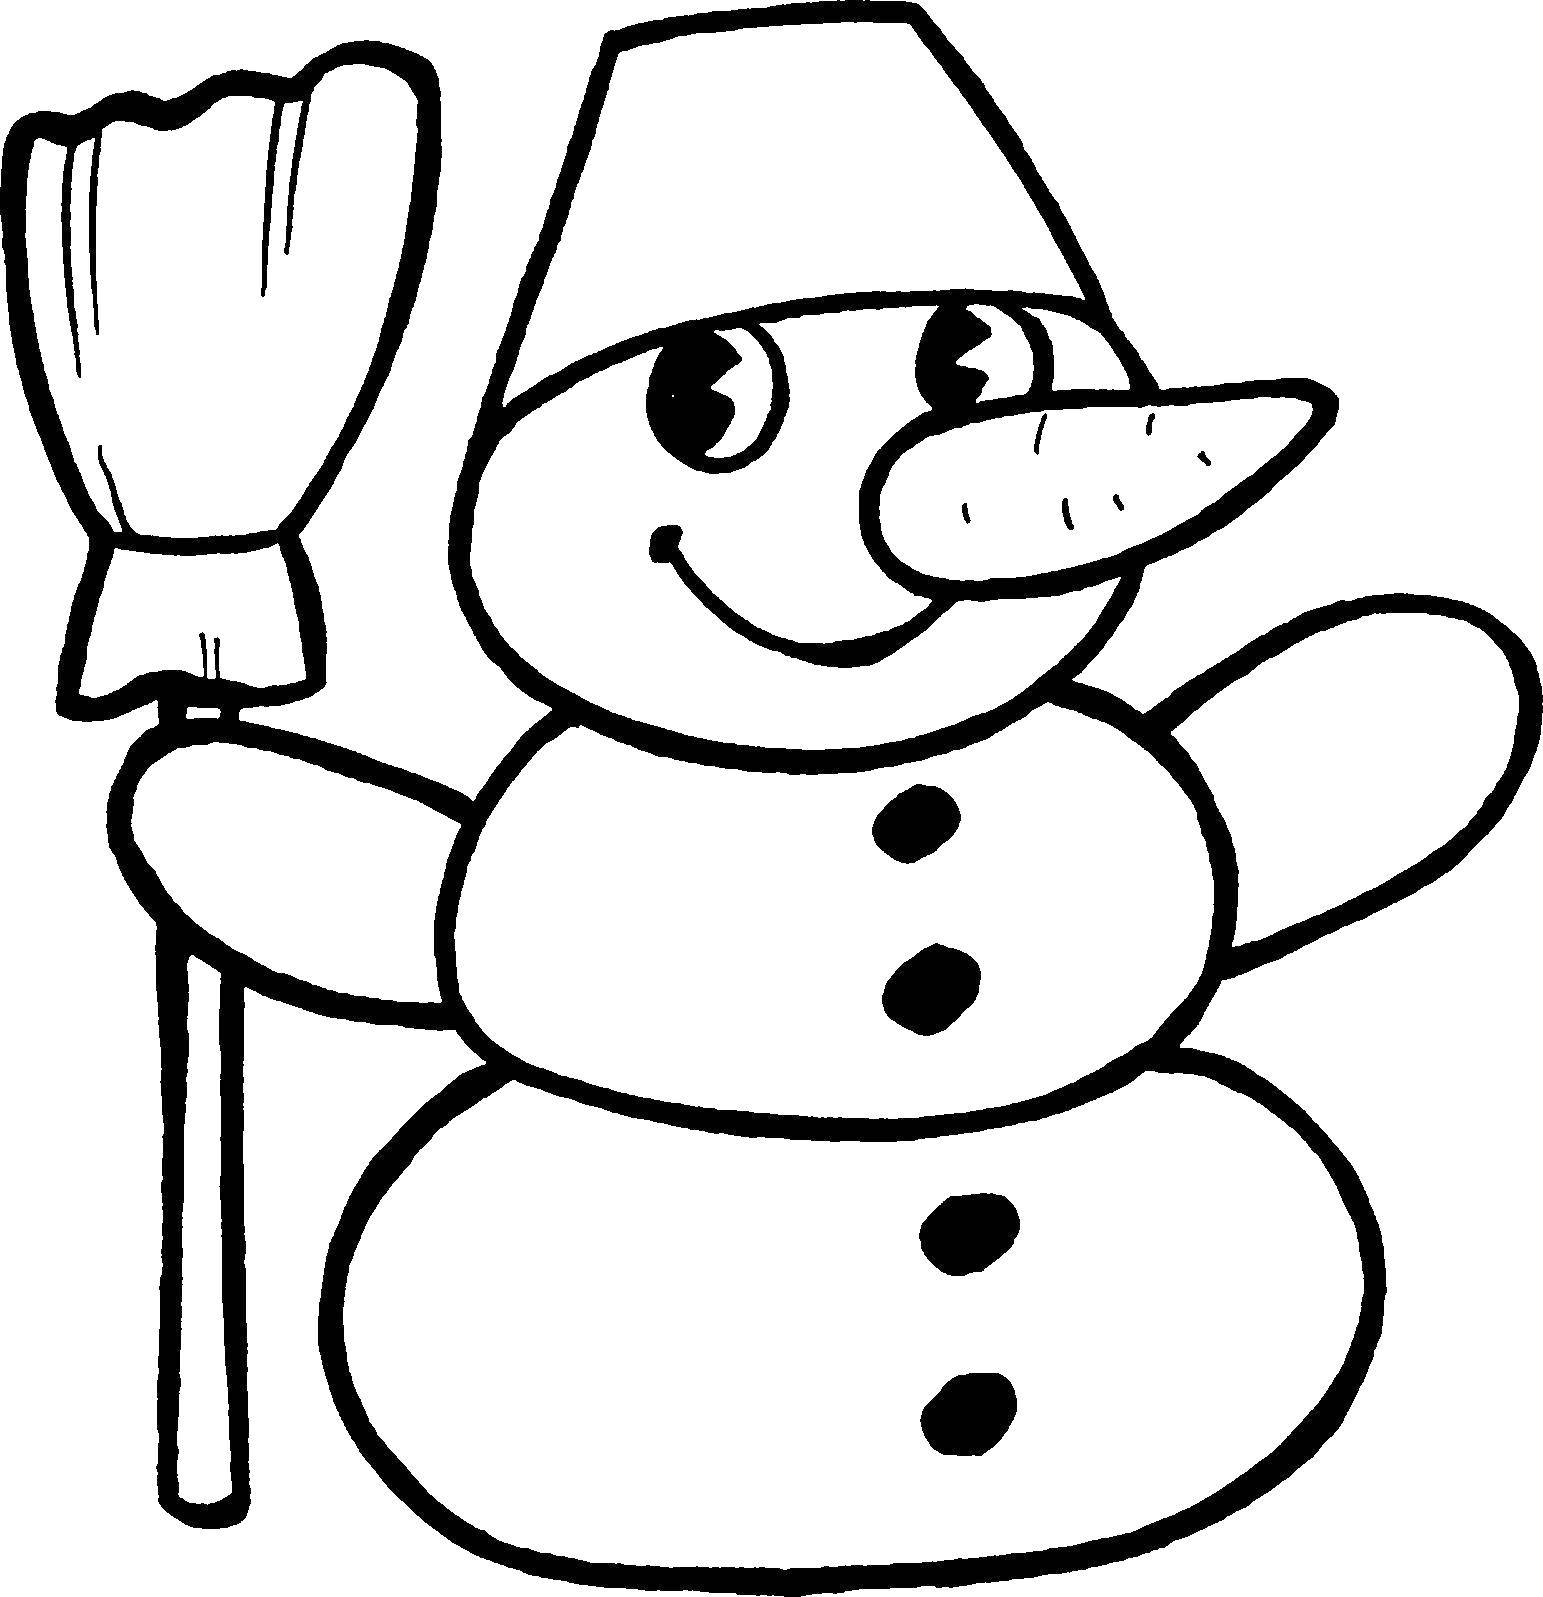 Coloring Snowman. Category Coloring pages for kids. Tags:  snowman bucket, broom.